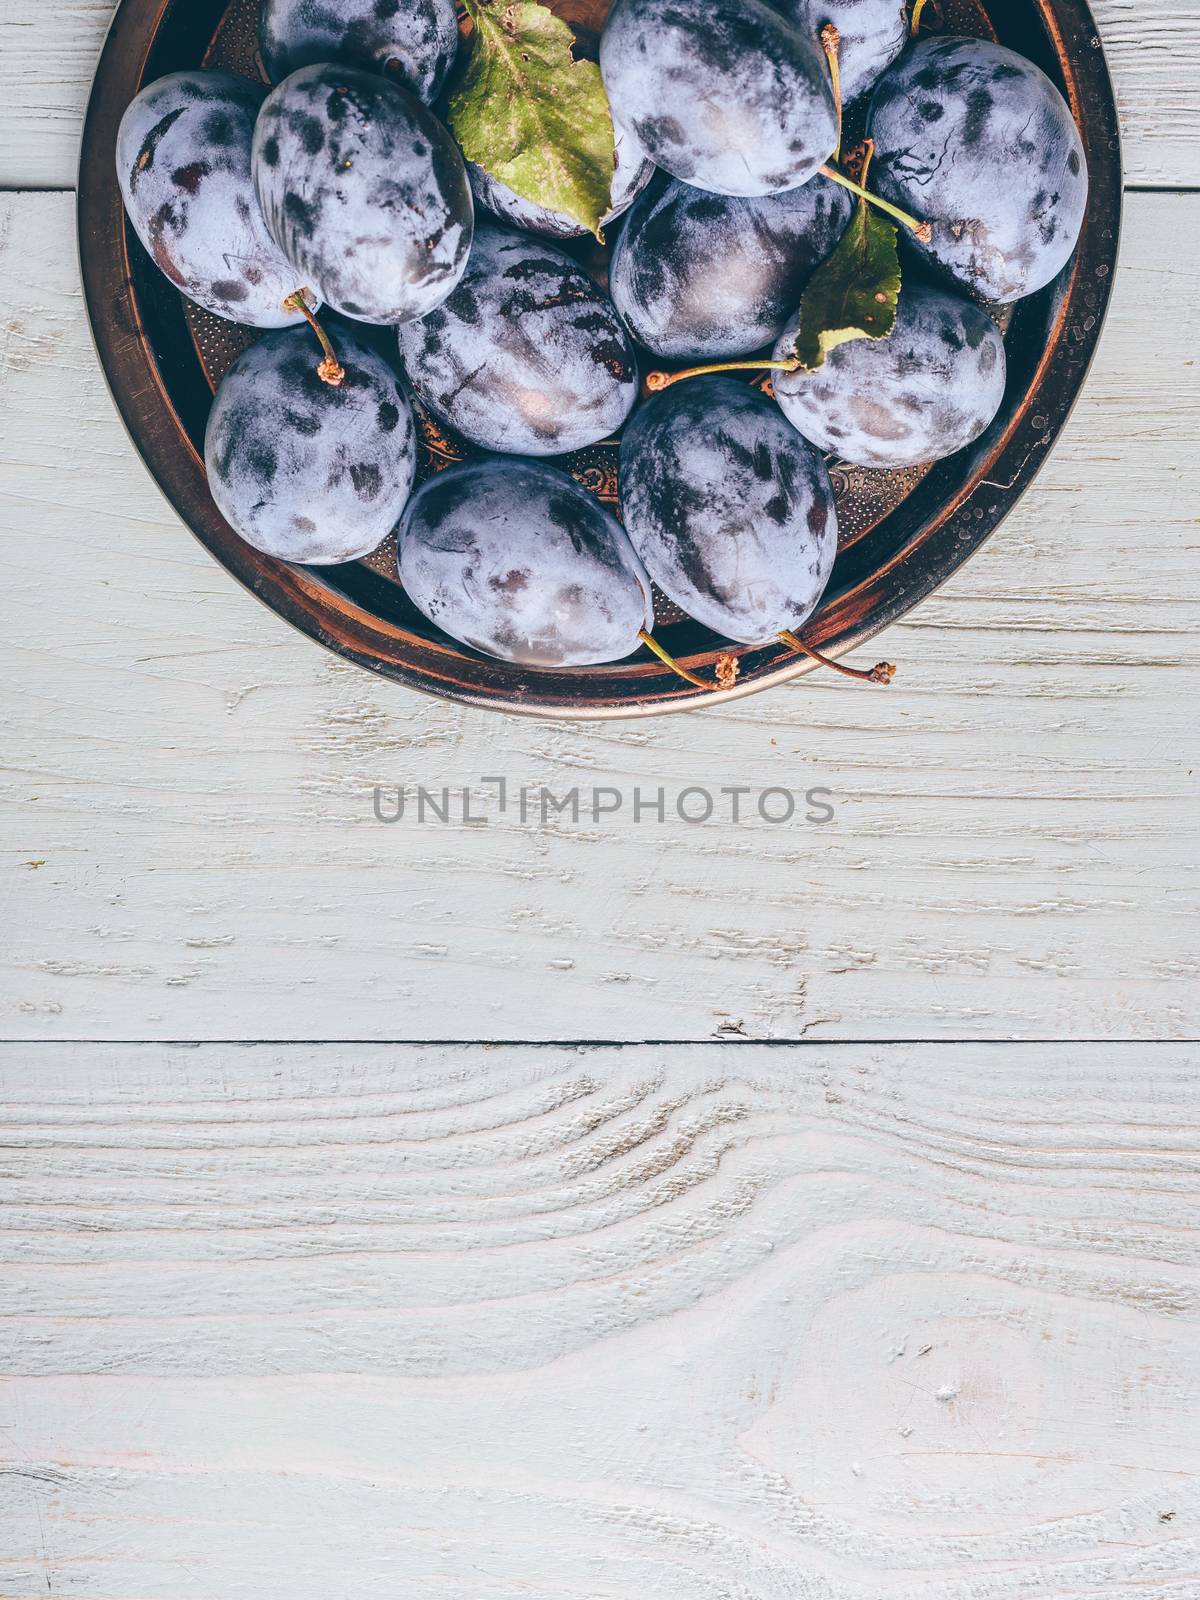 Ripe plums on metal plate over light wooden surface. Copy space